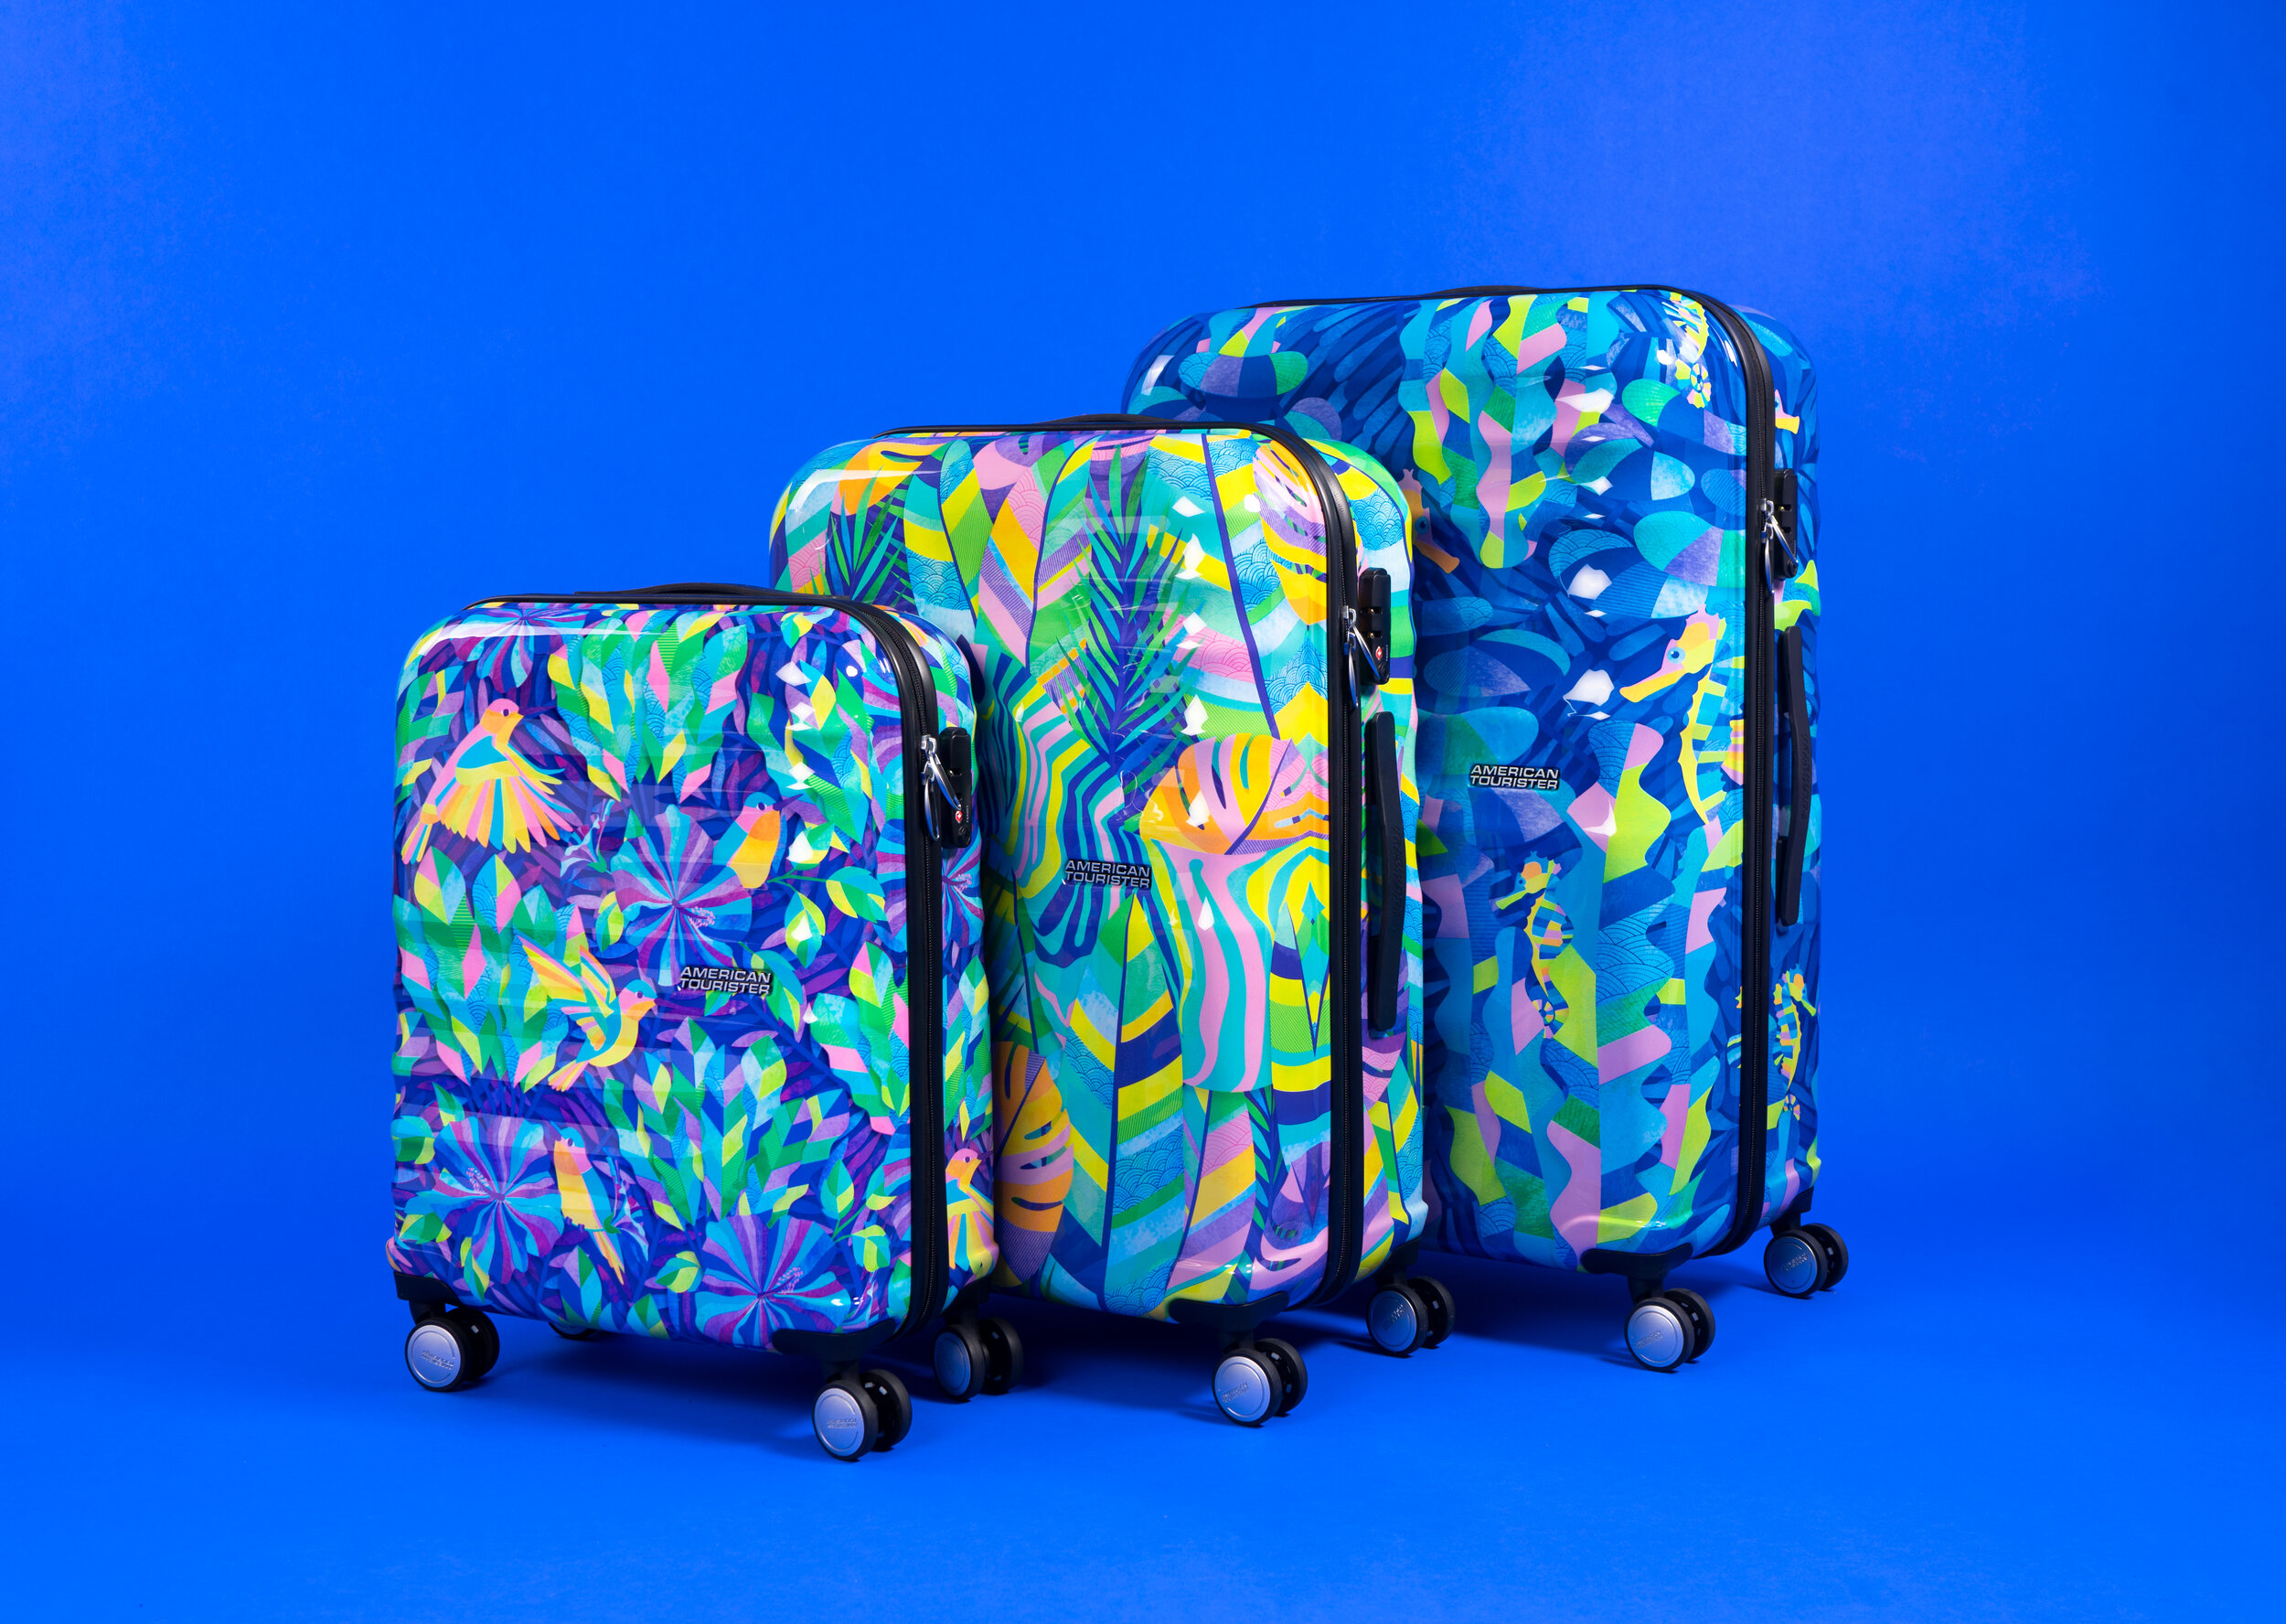 Catálogo American Tourister 2018 by American Tourister - Issuu